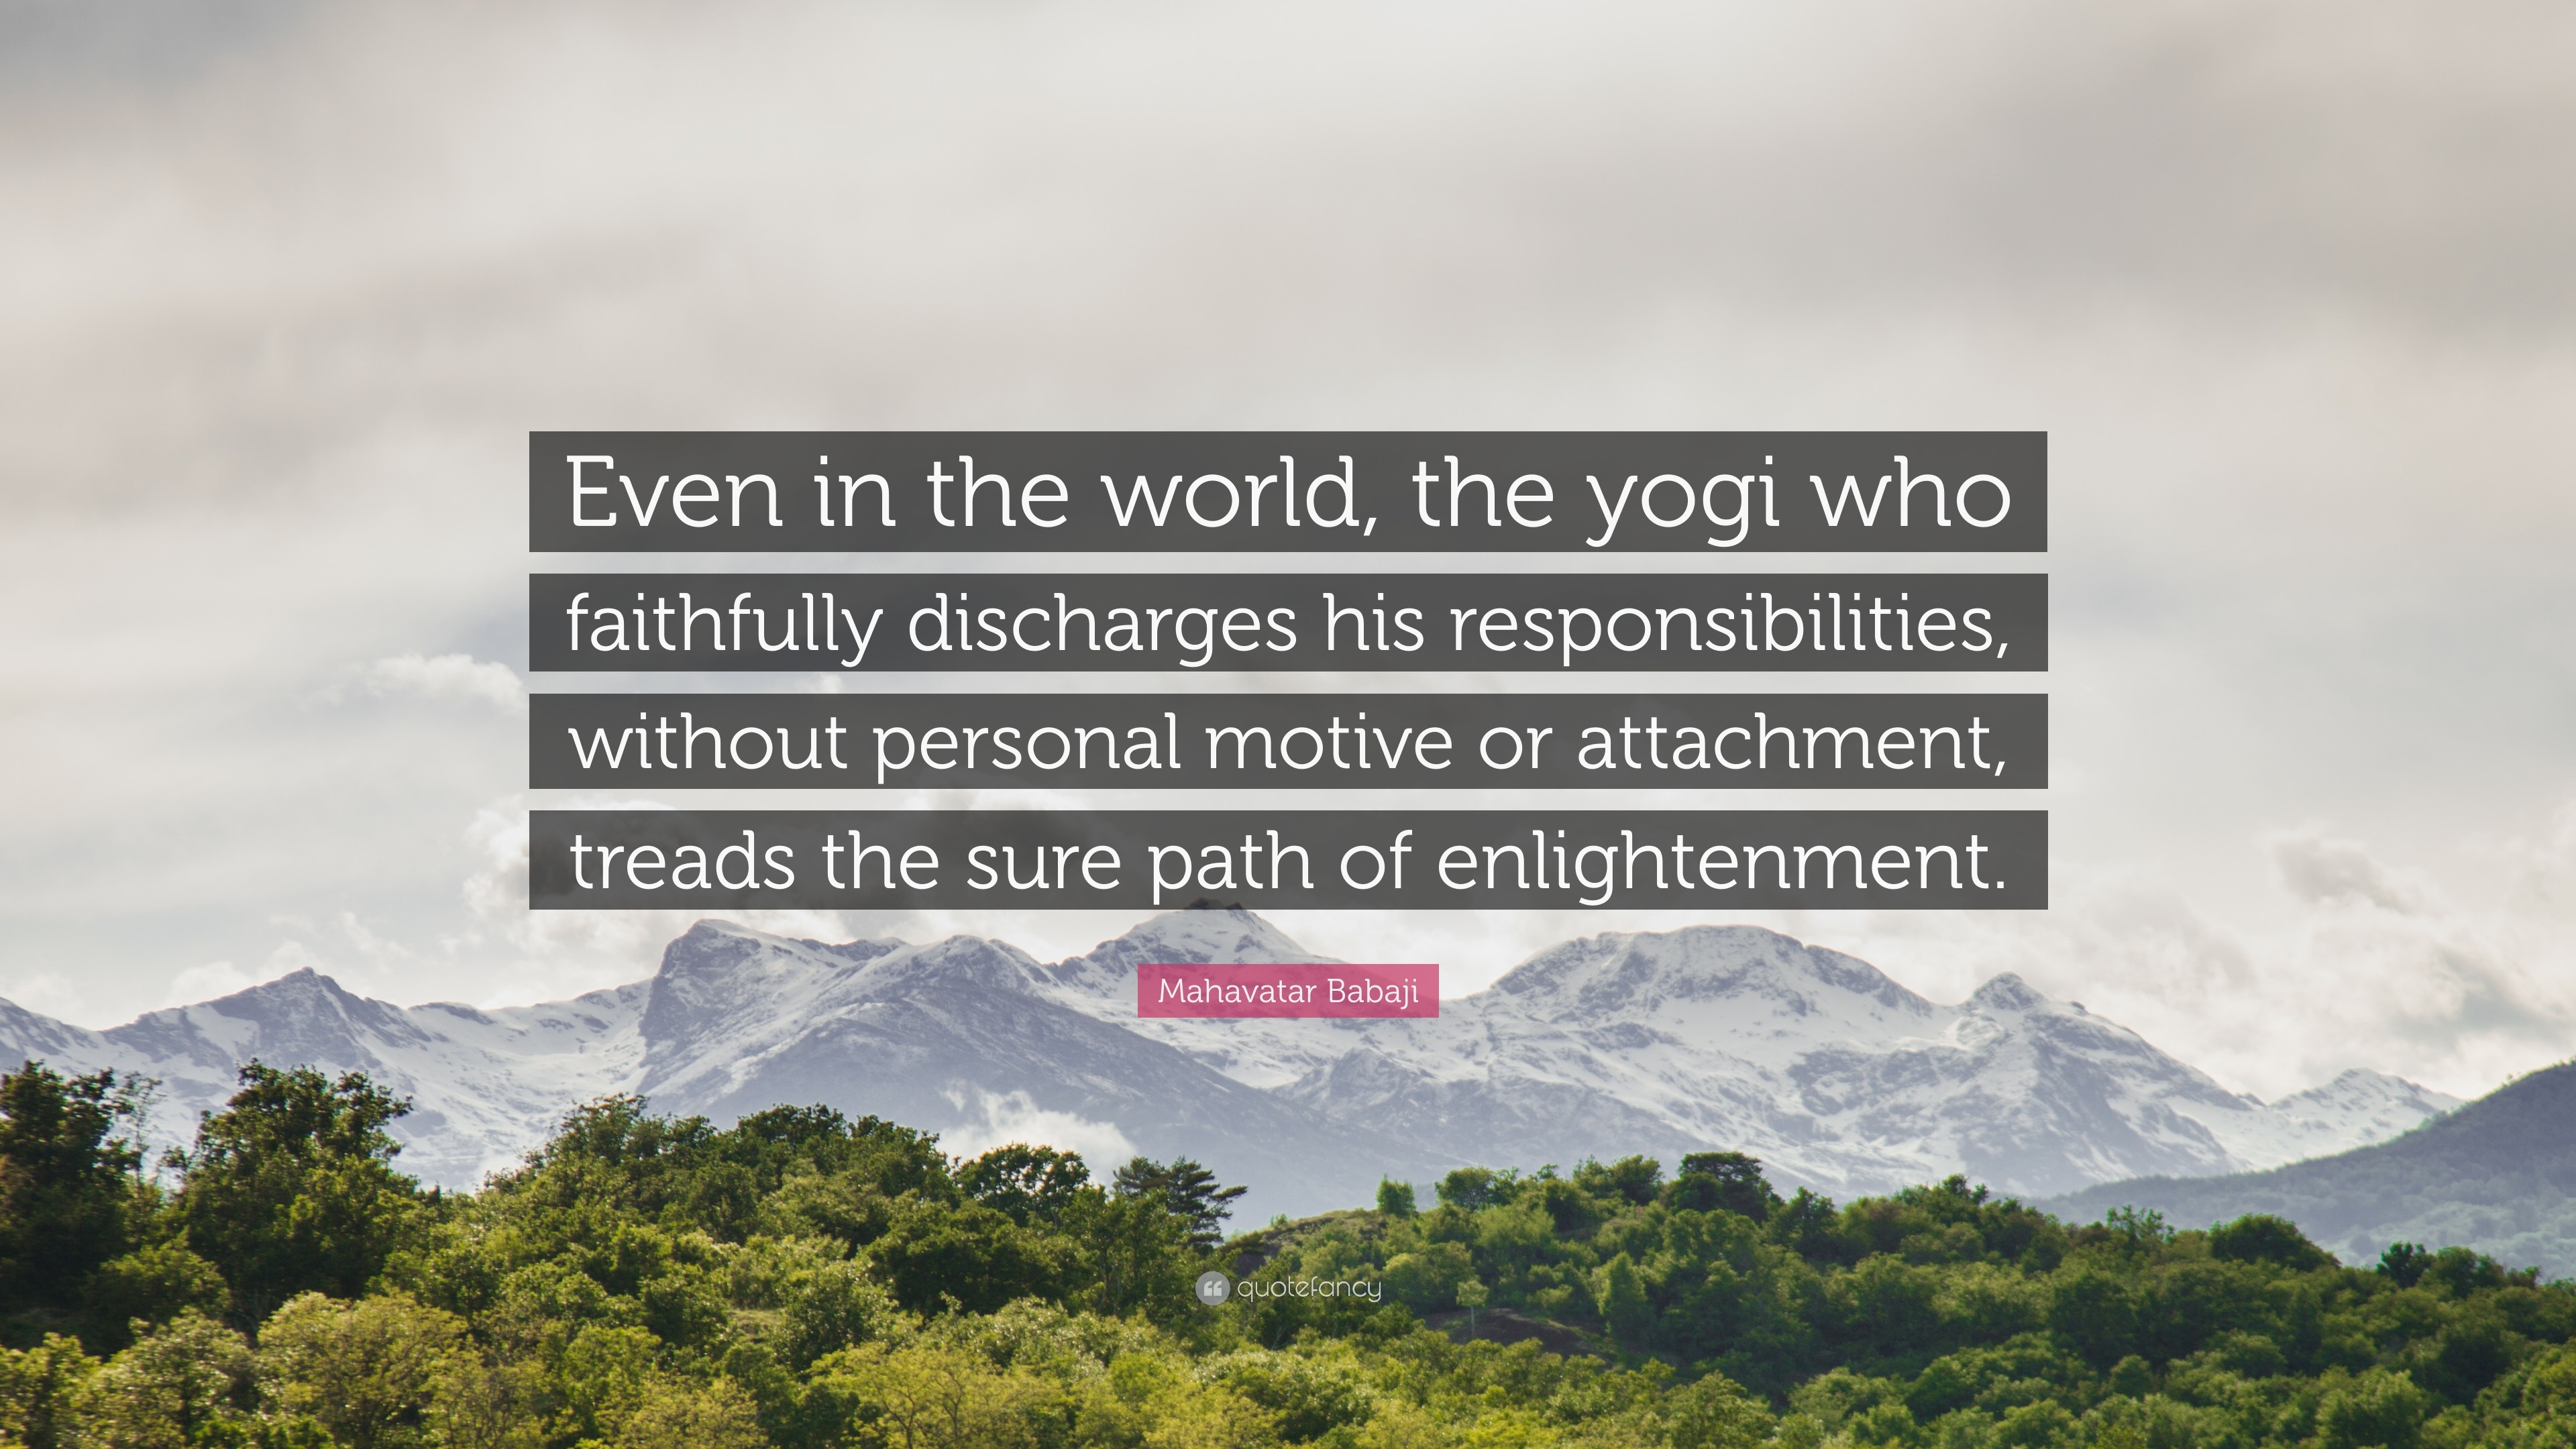 Mahavatar Babaji Quote: “Even in the world, the yogi who faithfully  discharges his responsibilities, without personal motive or attachment,  tread”